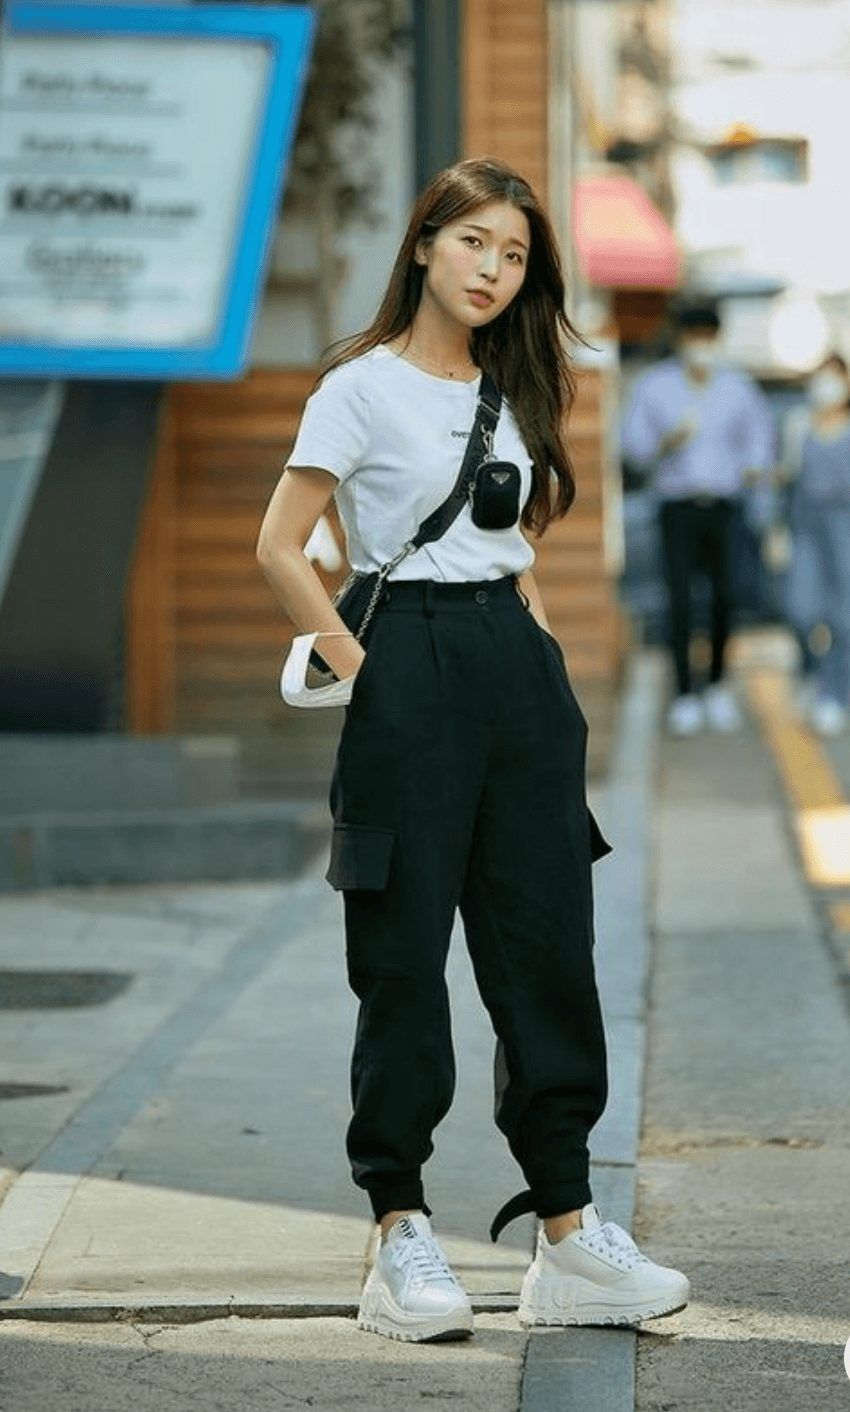 11 Simple and Stylish Cinema Look, OOTD, Which One is Your Favorite?